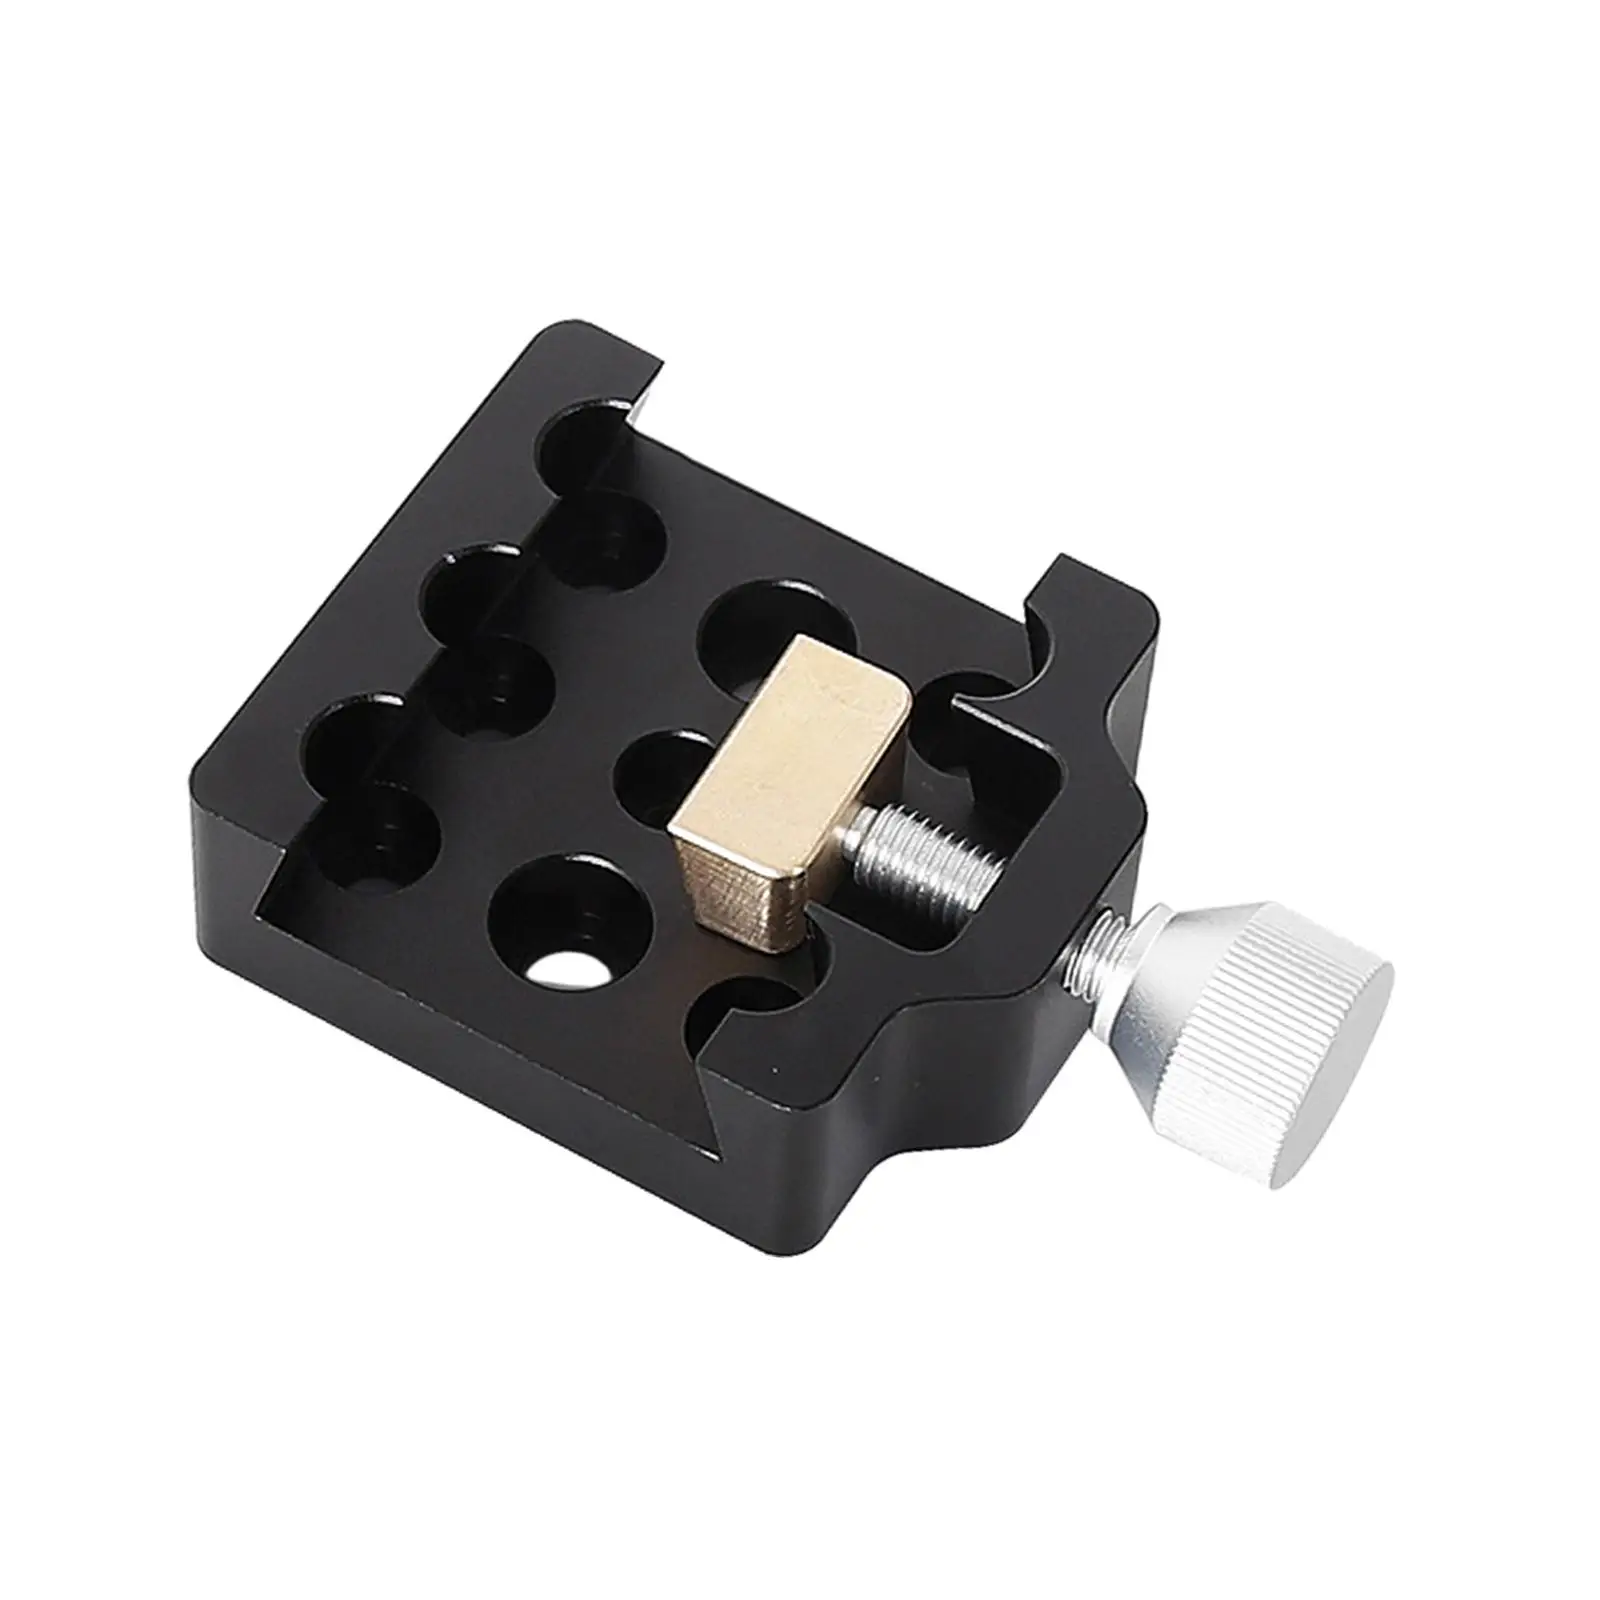 Telescope Adapter Mount Base Saddle Clamp Metal for Telescopes and Cameras